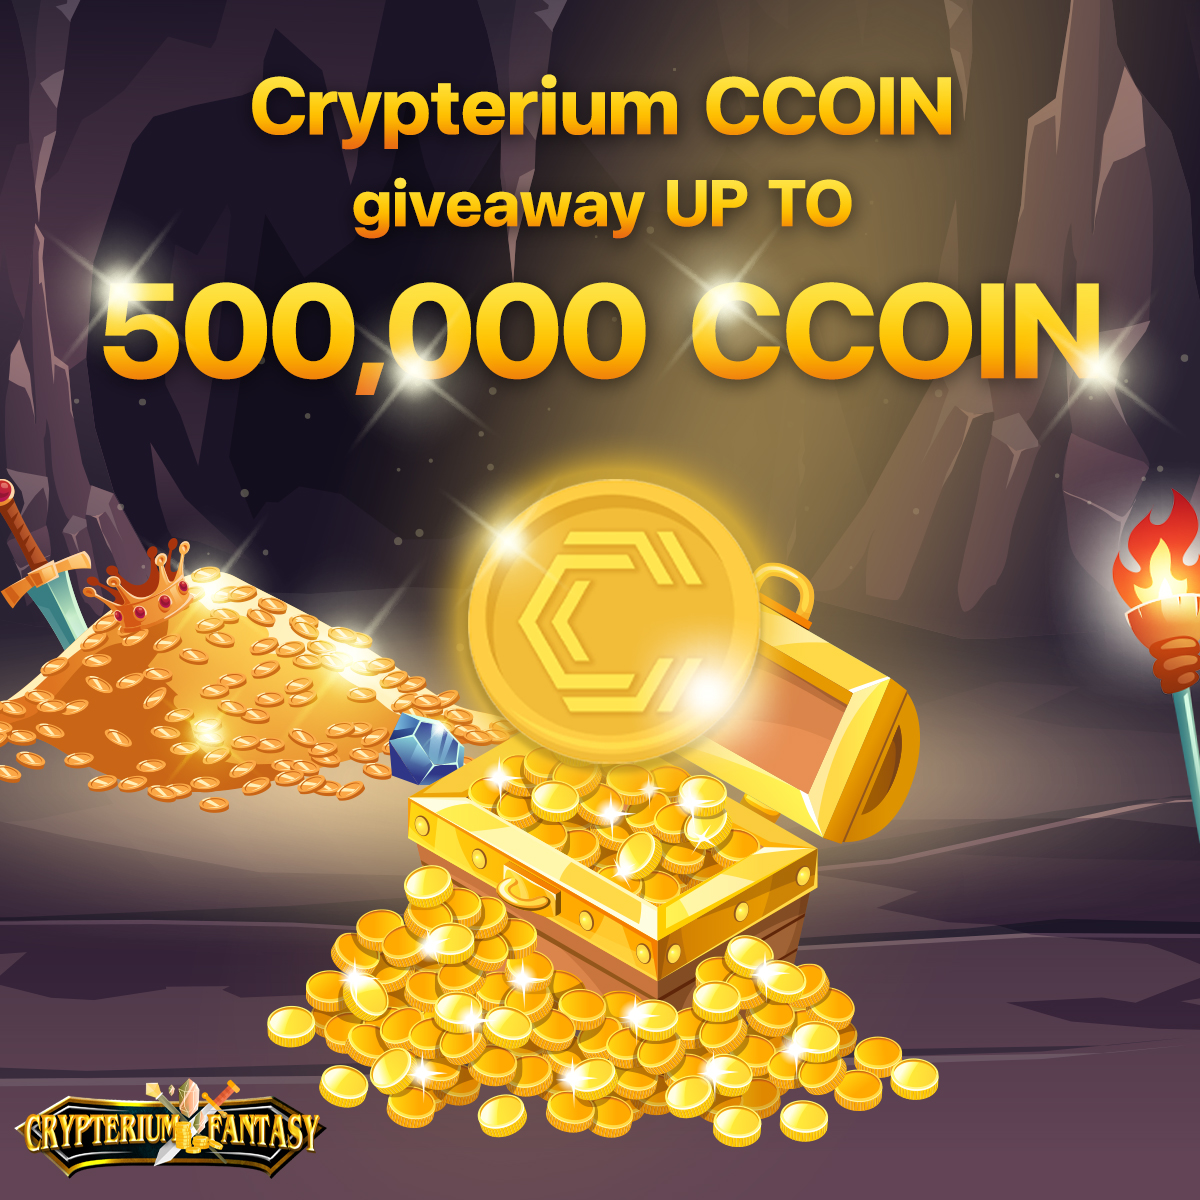 Dear Adventurer ⚔️ 📣 Our big event is here with CCOIN giveaway UP 500,000 CCOIN !!🔥 👇 Check it out do not miss out on this airdrop event Gleam link :gleam.io/cdN0b/1st-cryp… ⏰ Campaign Period: May 13, 2022 (12.00 UTC) — June 13, 2022 (12.00 UTC)